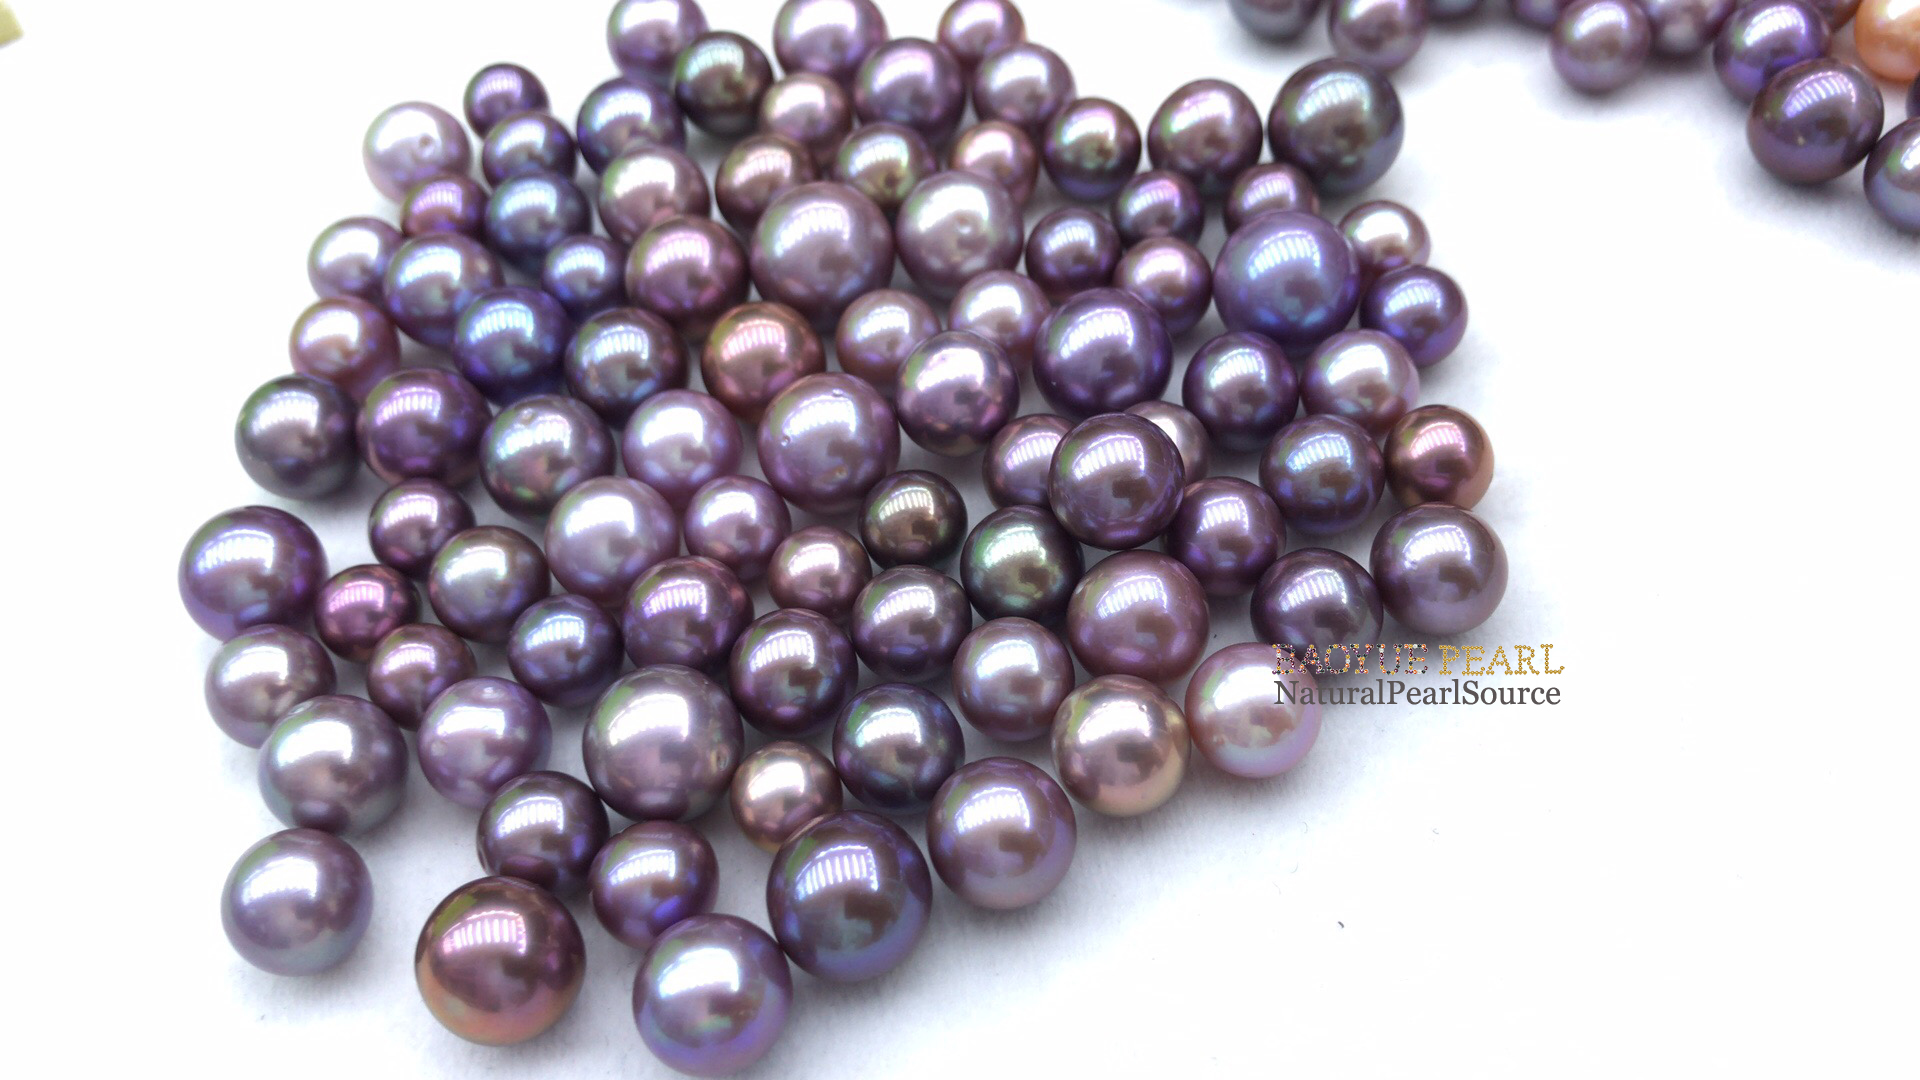 10-15 mm AA Violet Pearls Purple pearl near round nature loose freshwater pearl wholesale DIY BEADS,half,OR no hole